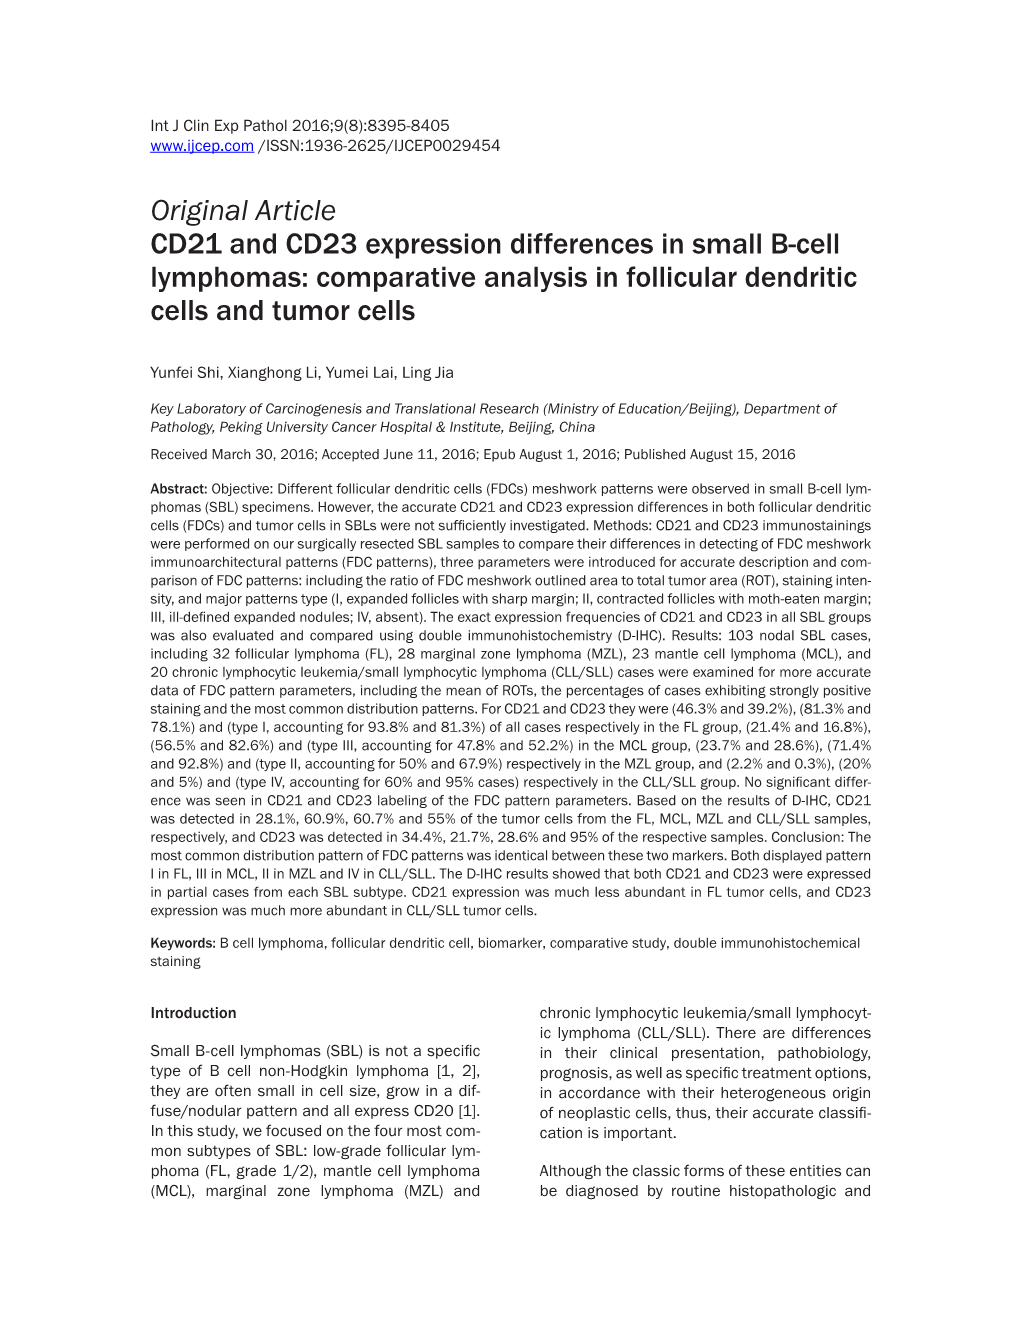 Original Article CD21 and CD23 Expression Differences in Small B-Cell Lymphomas: Comparative Analysis in Follicular Dendritic Cells and Tumor Cells